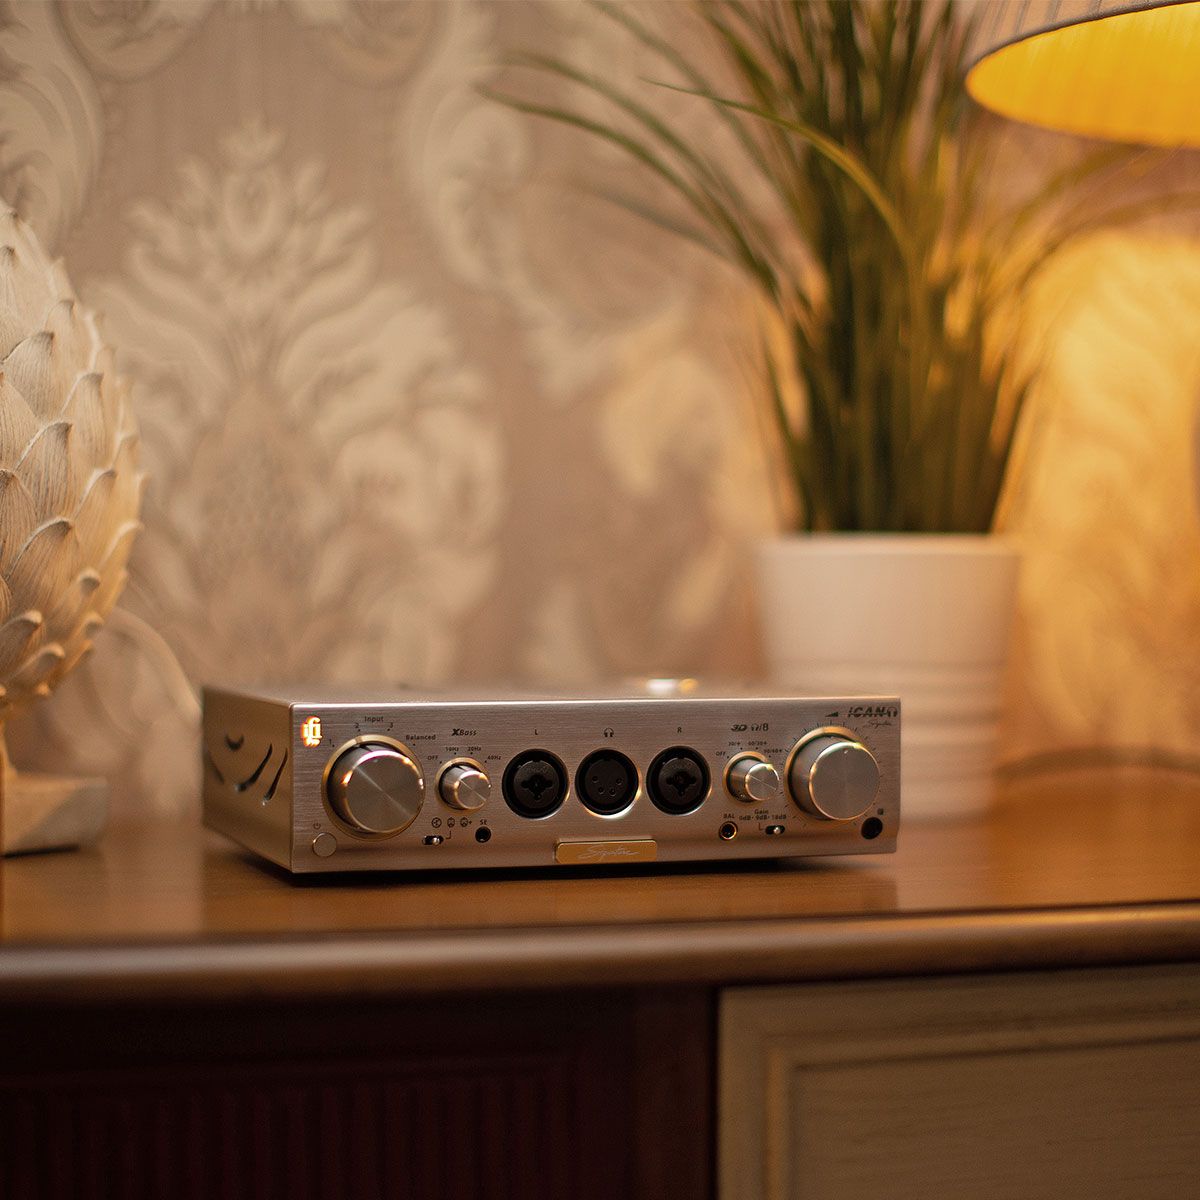 iFi iCAN Pro Signature Amplifier on table